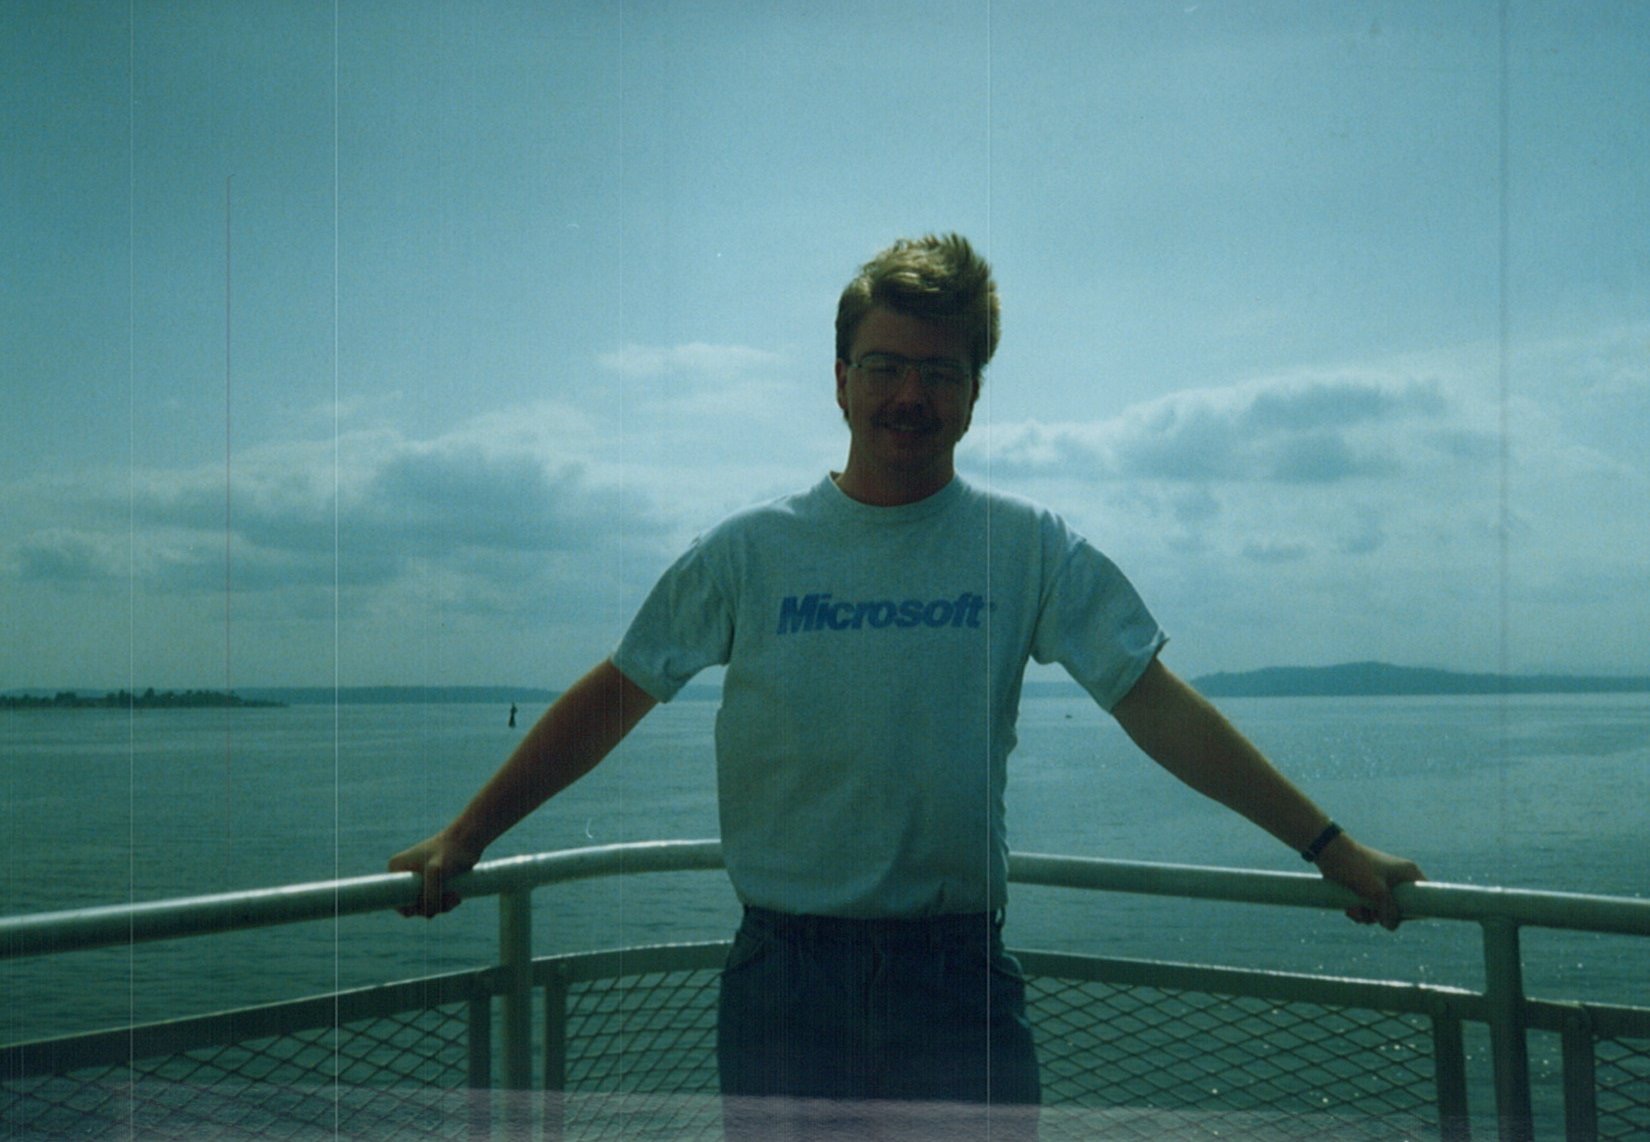 Plummer set sail for a career at Microsoft in the mid-1990s. 